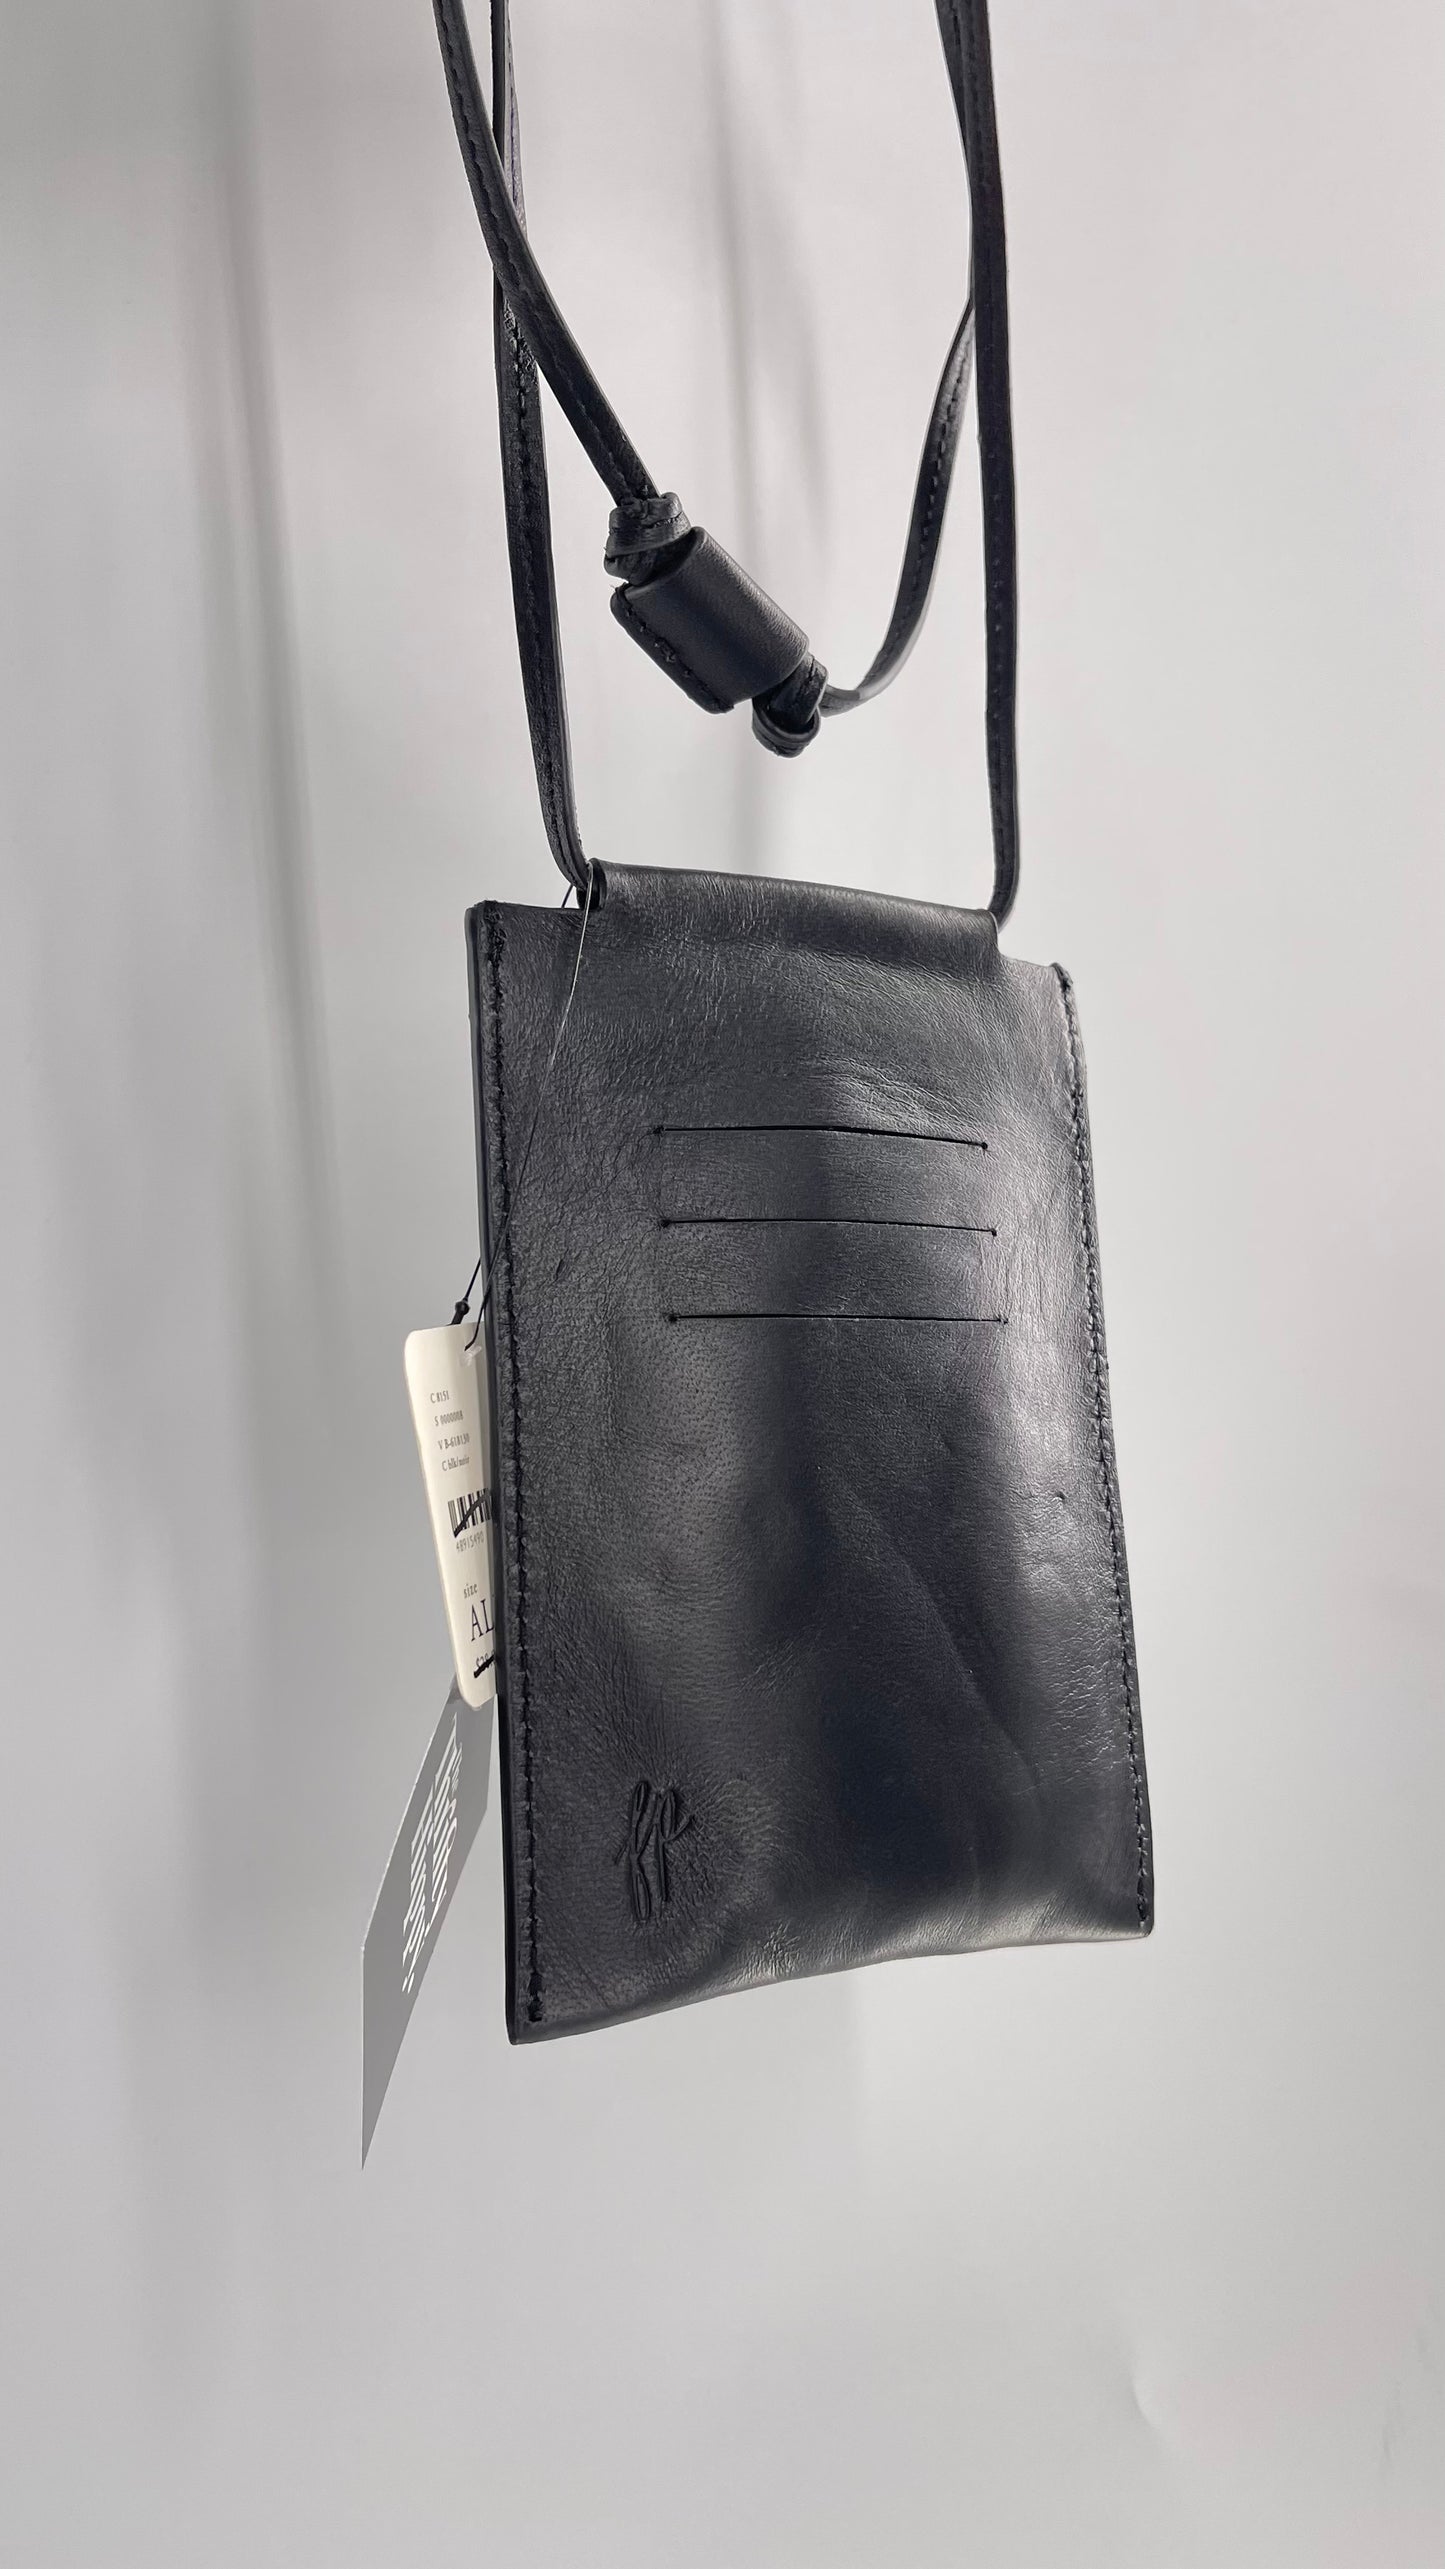 Free People Black Leather Crossbody Phone Pouch with Card Slots and Tags Attached